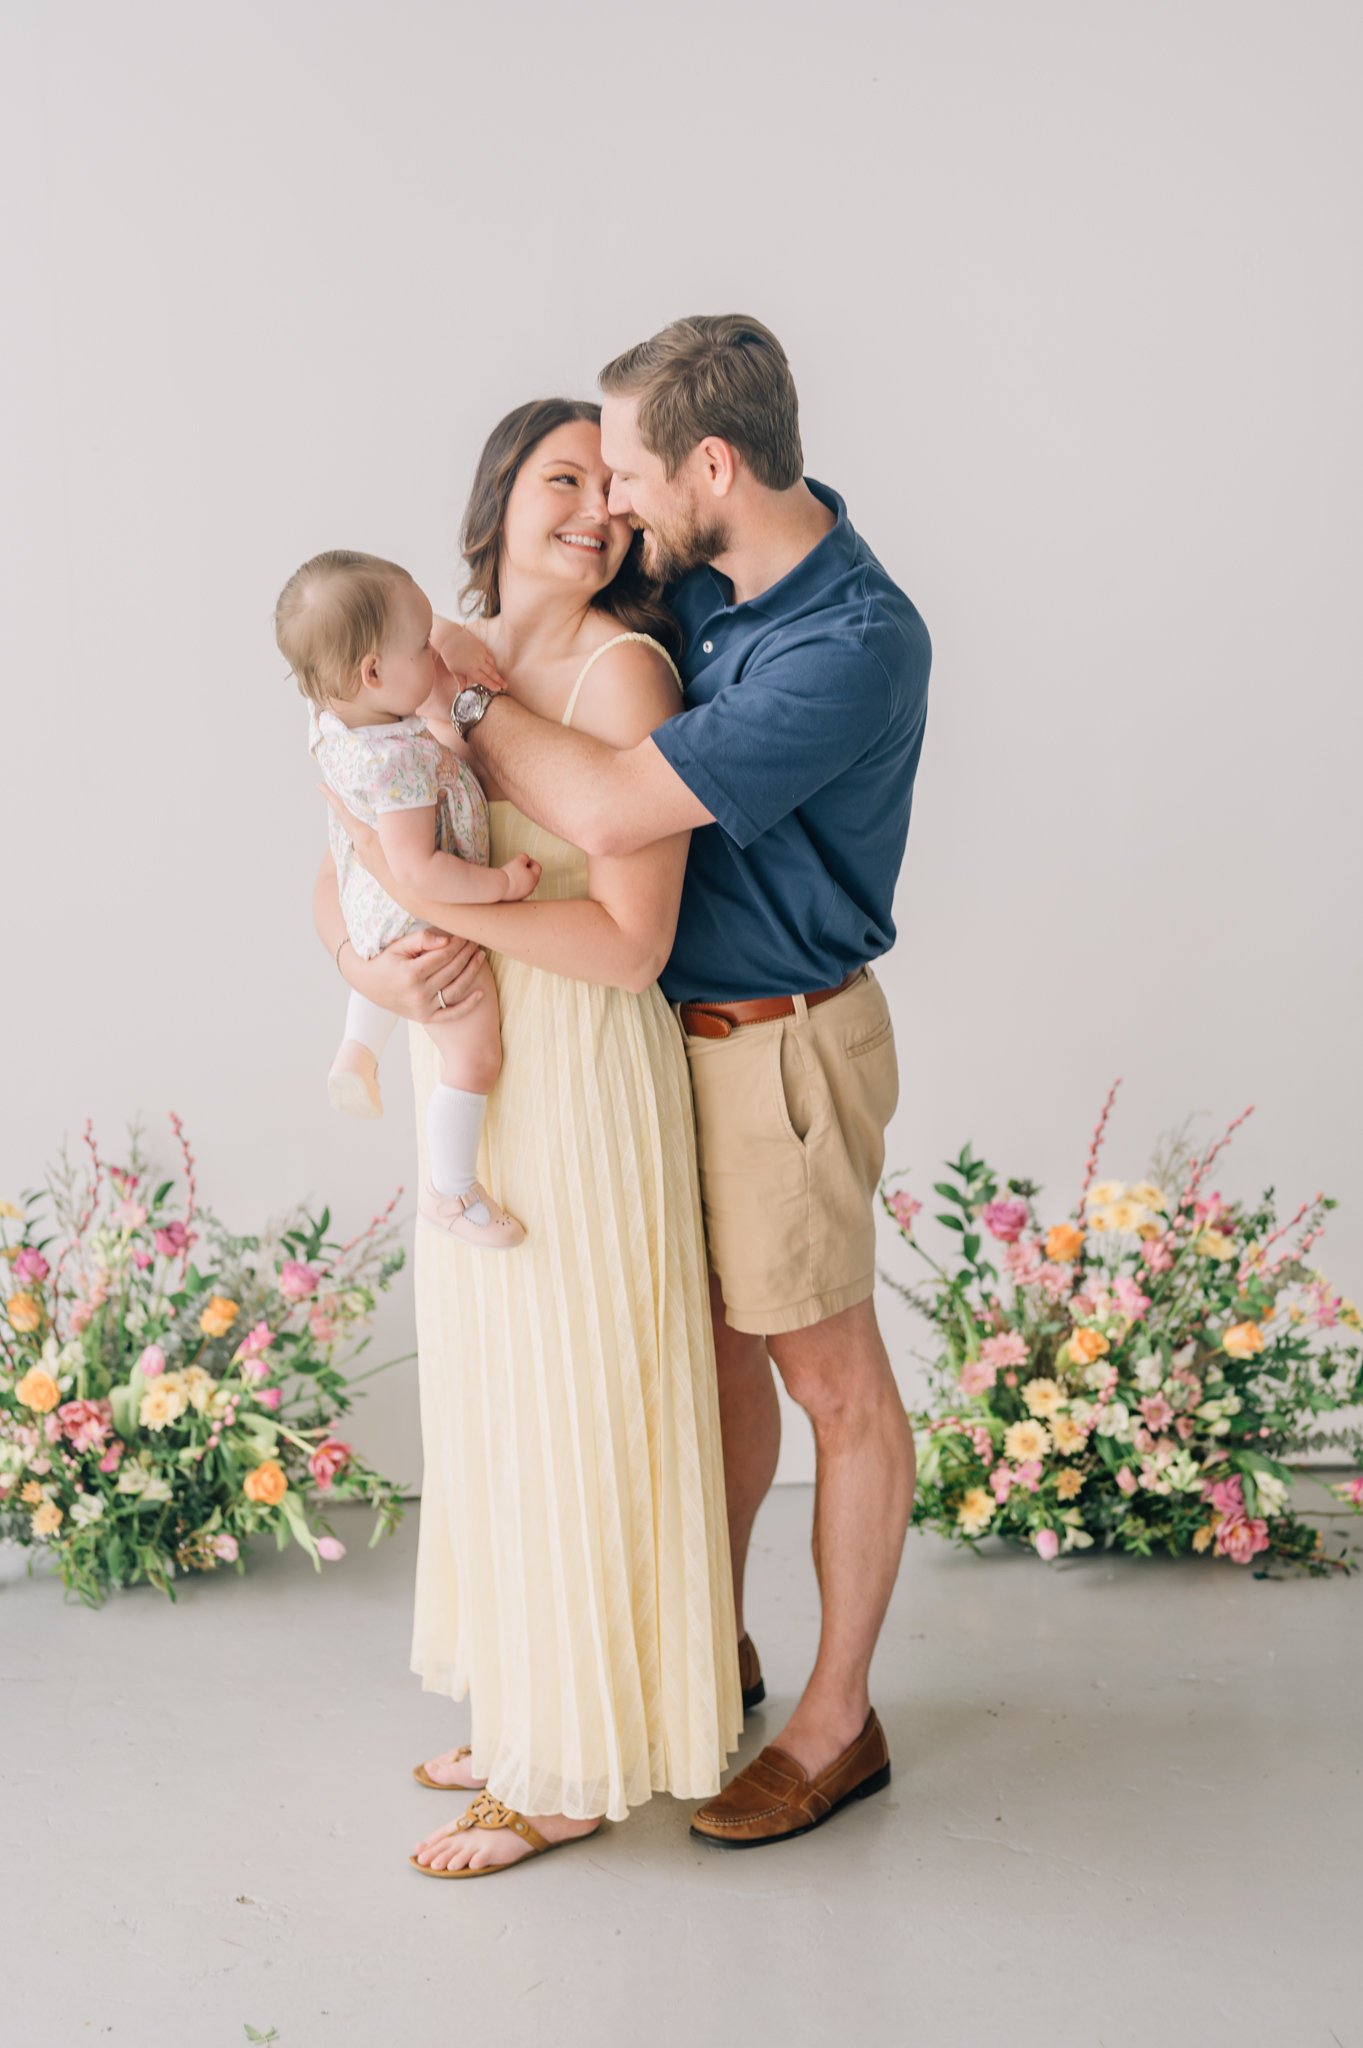 studio family photos with flowers in Greenville, South Carolina-2475.jpg